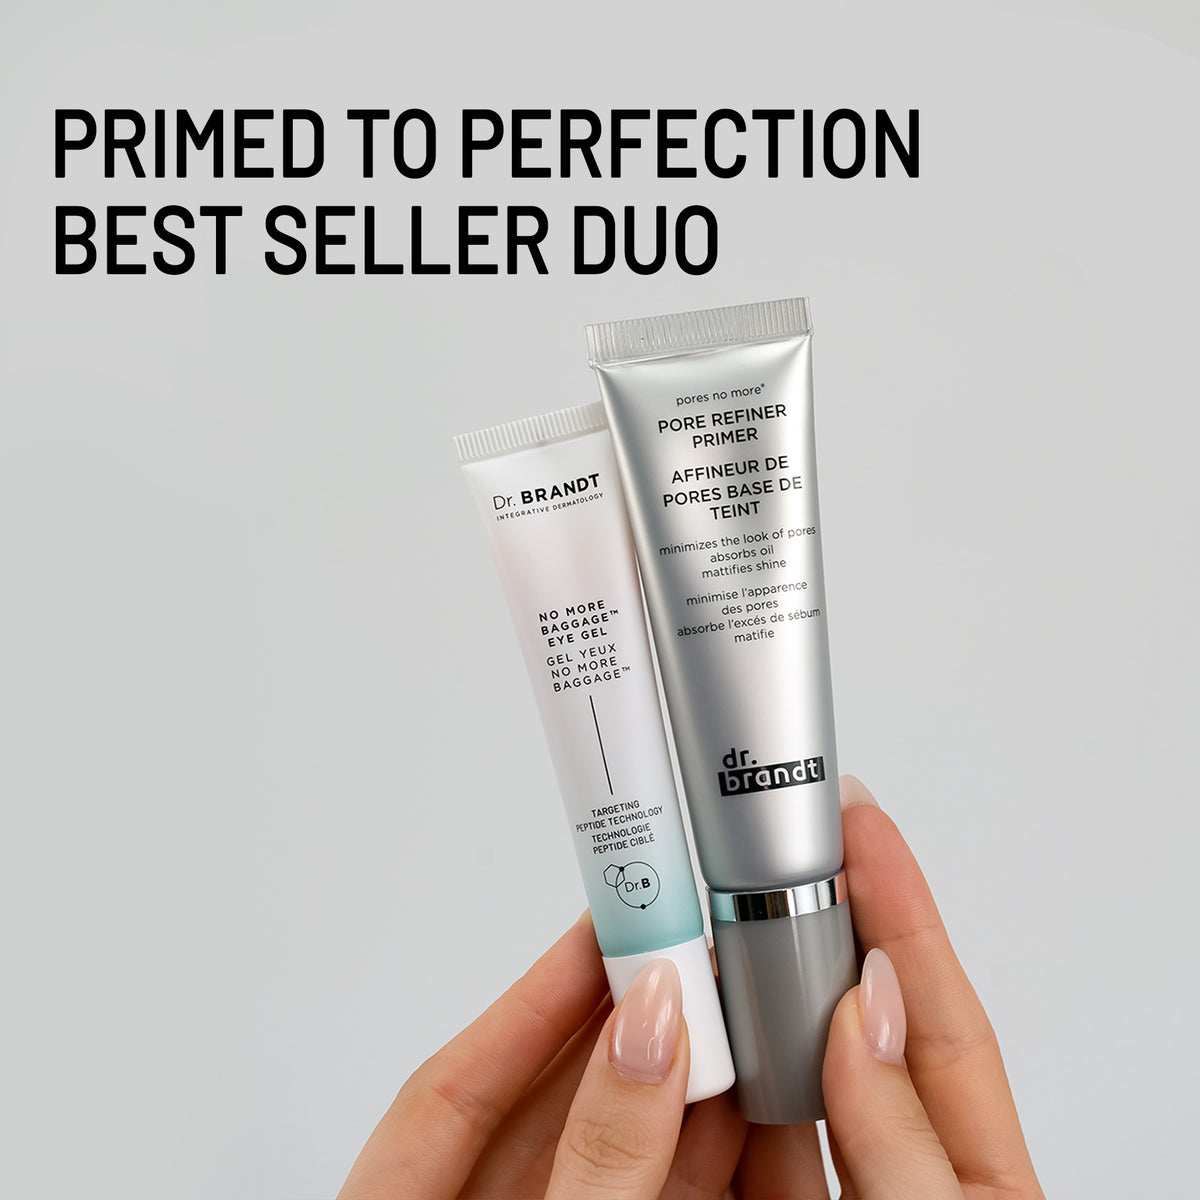 PRIMED TO PERFECTION DUO 2.0